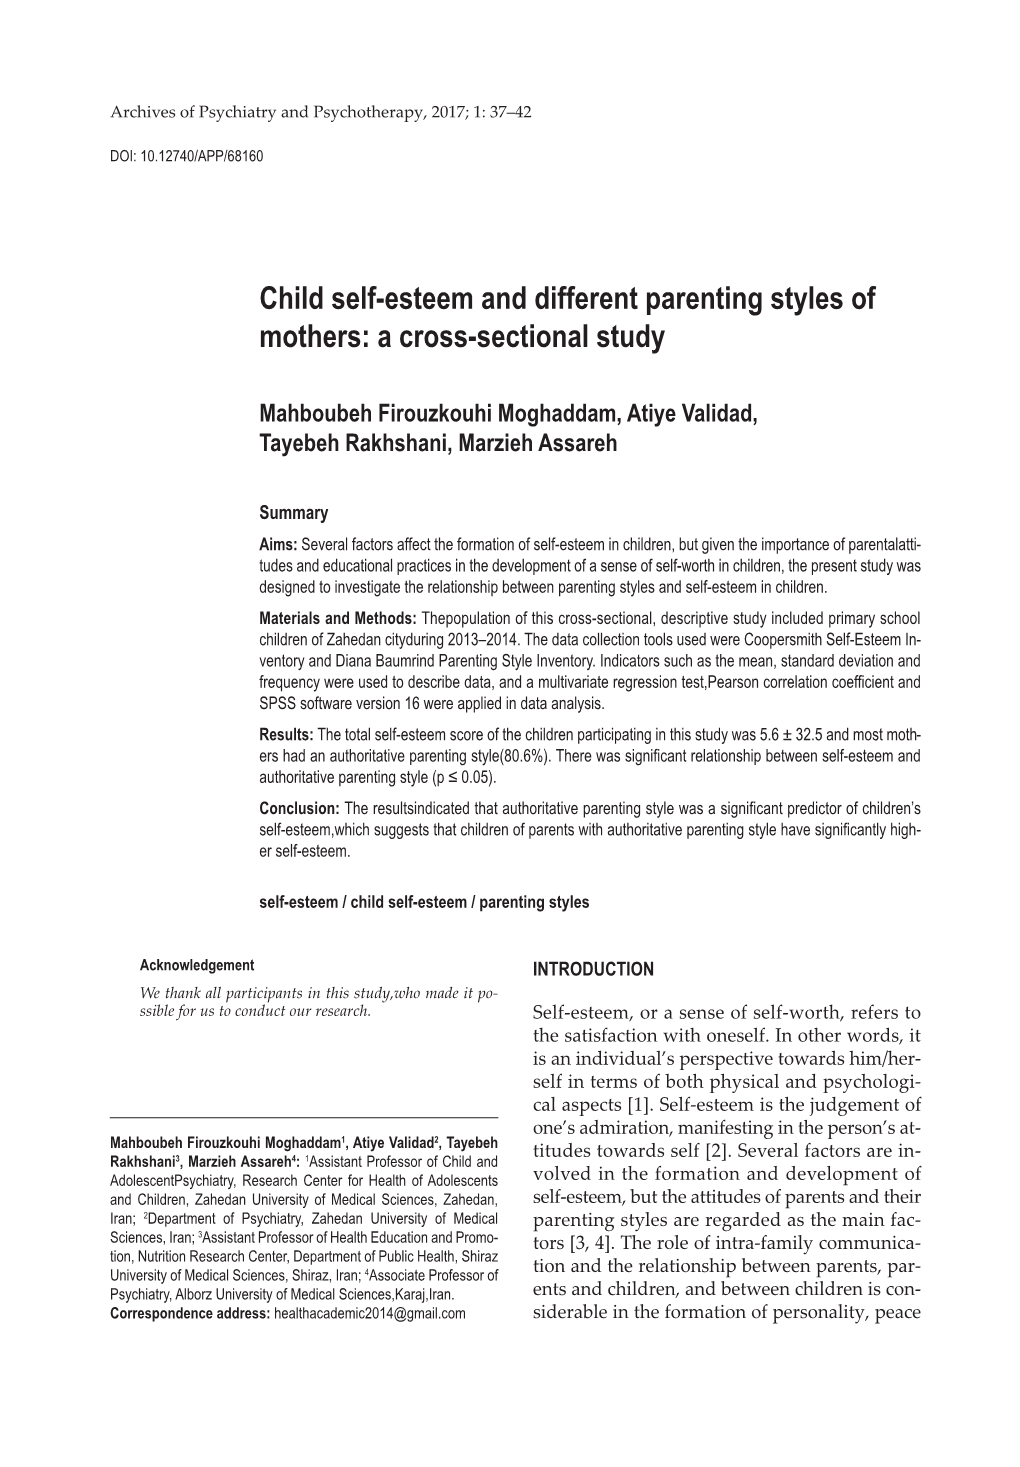 Child Self-Esteem and Different Parenting Styles of Mothers: a Cross-Sectional Study